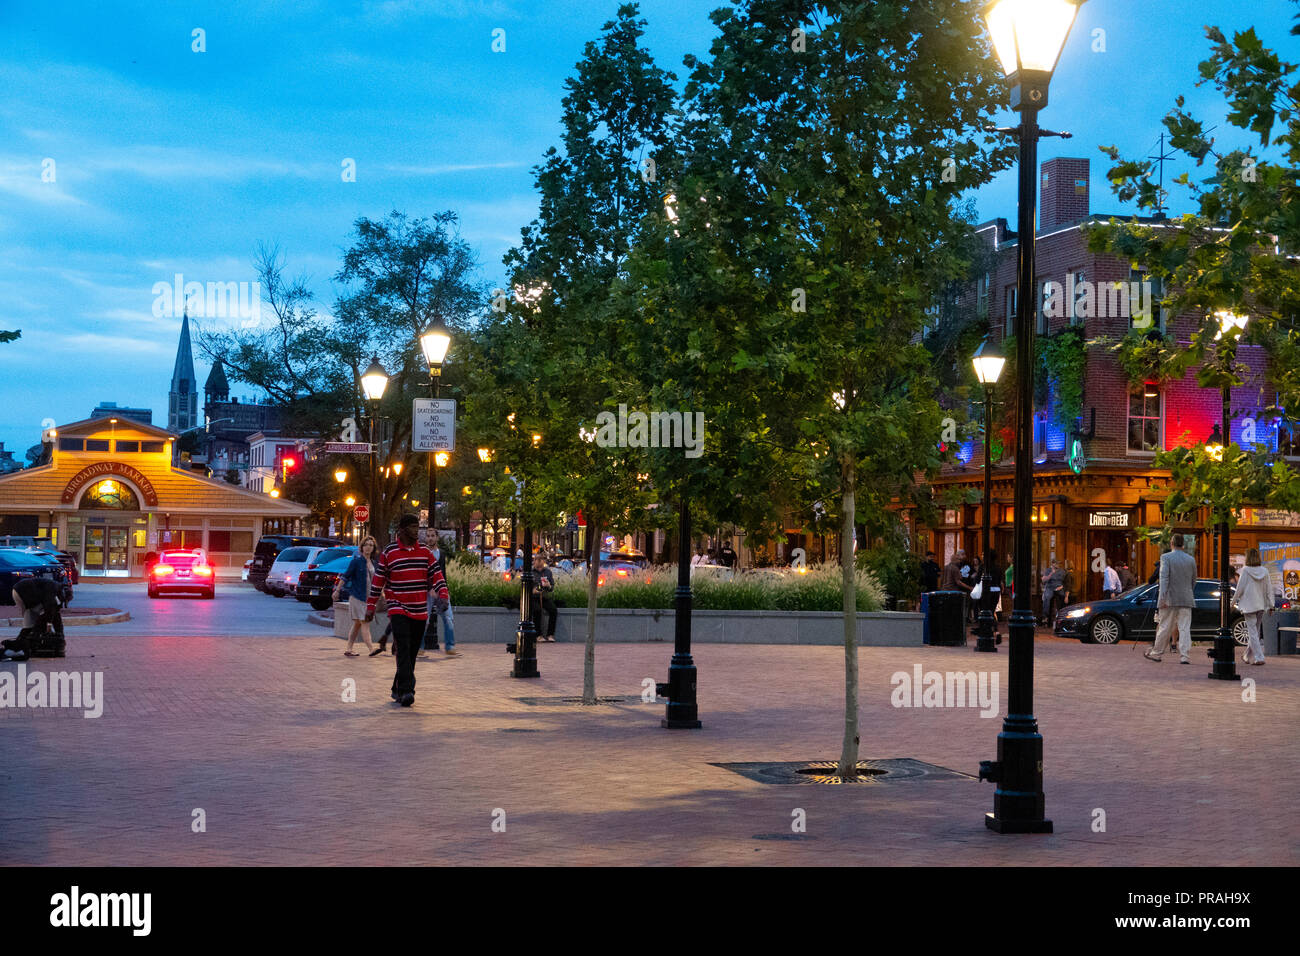 USA Maryland MD Baltimore Fells Point Broadway Square at night evening Stock Photo